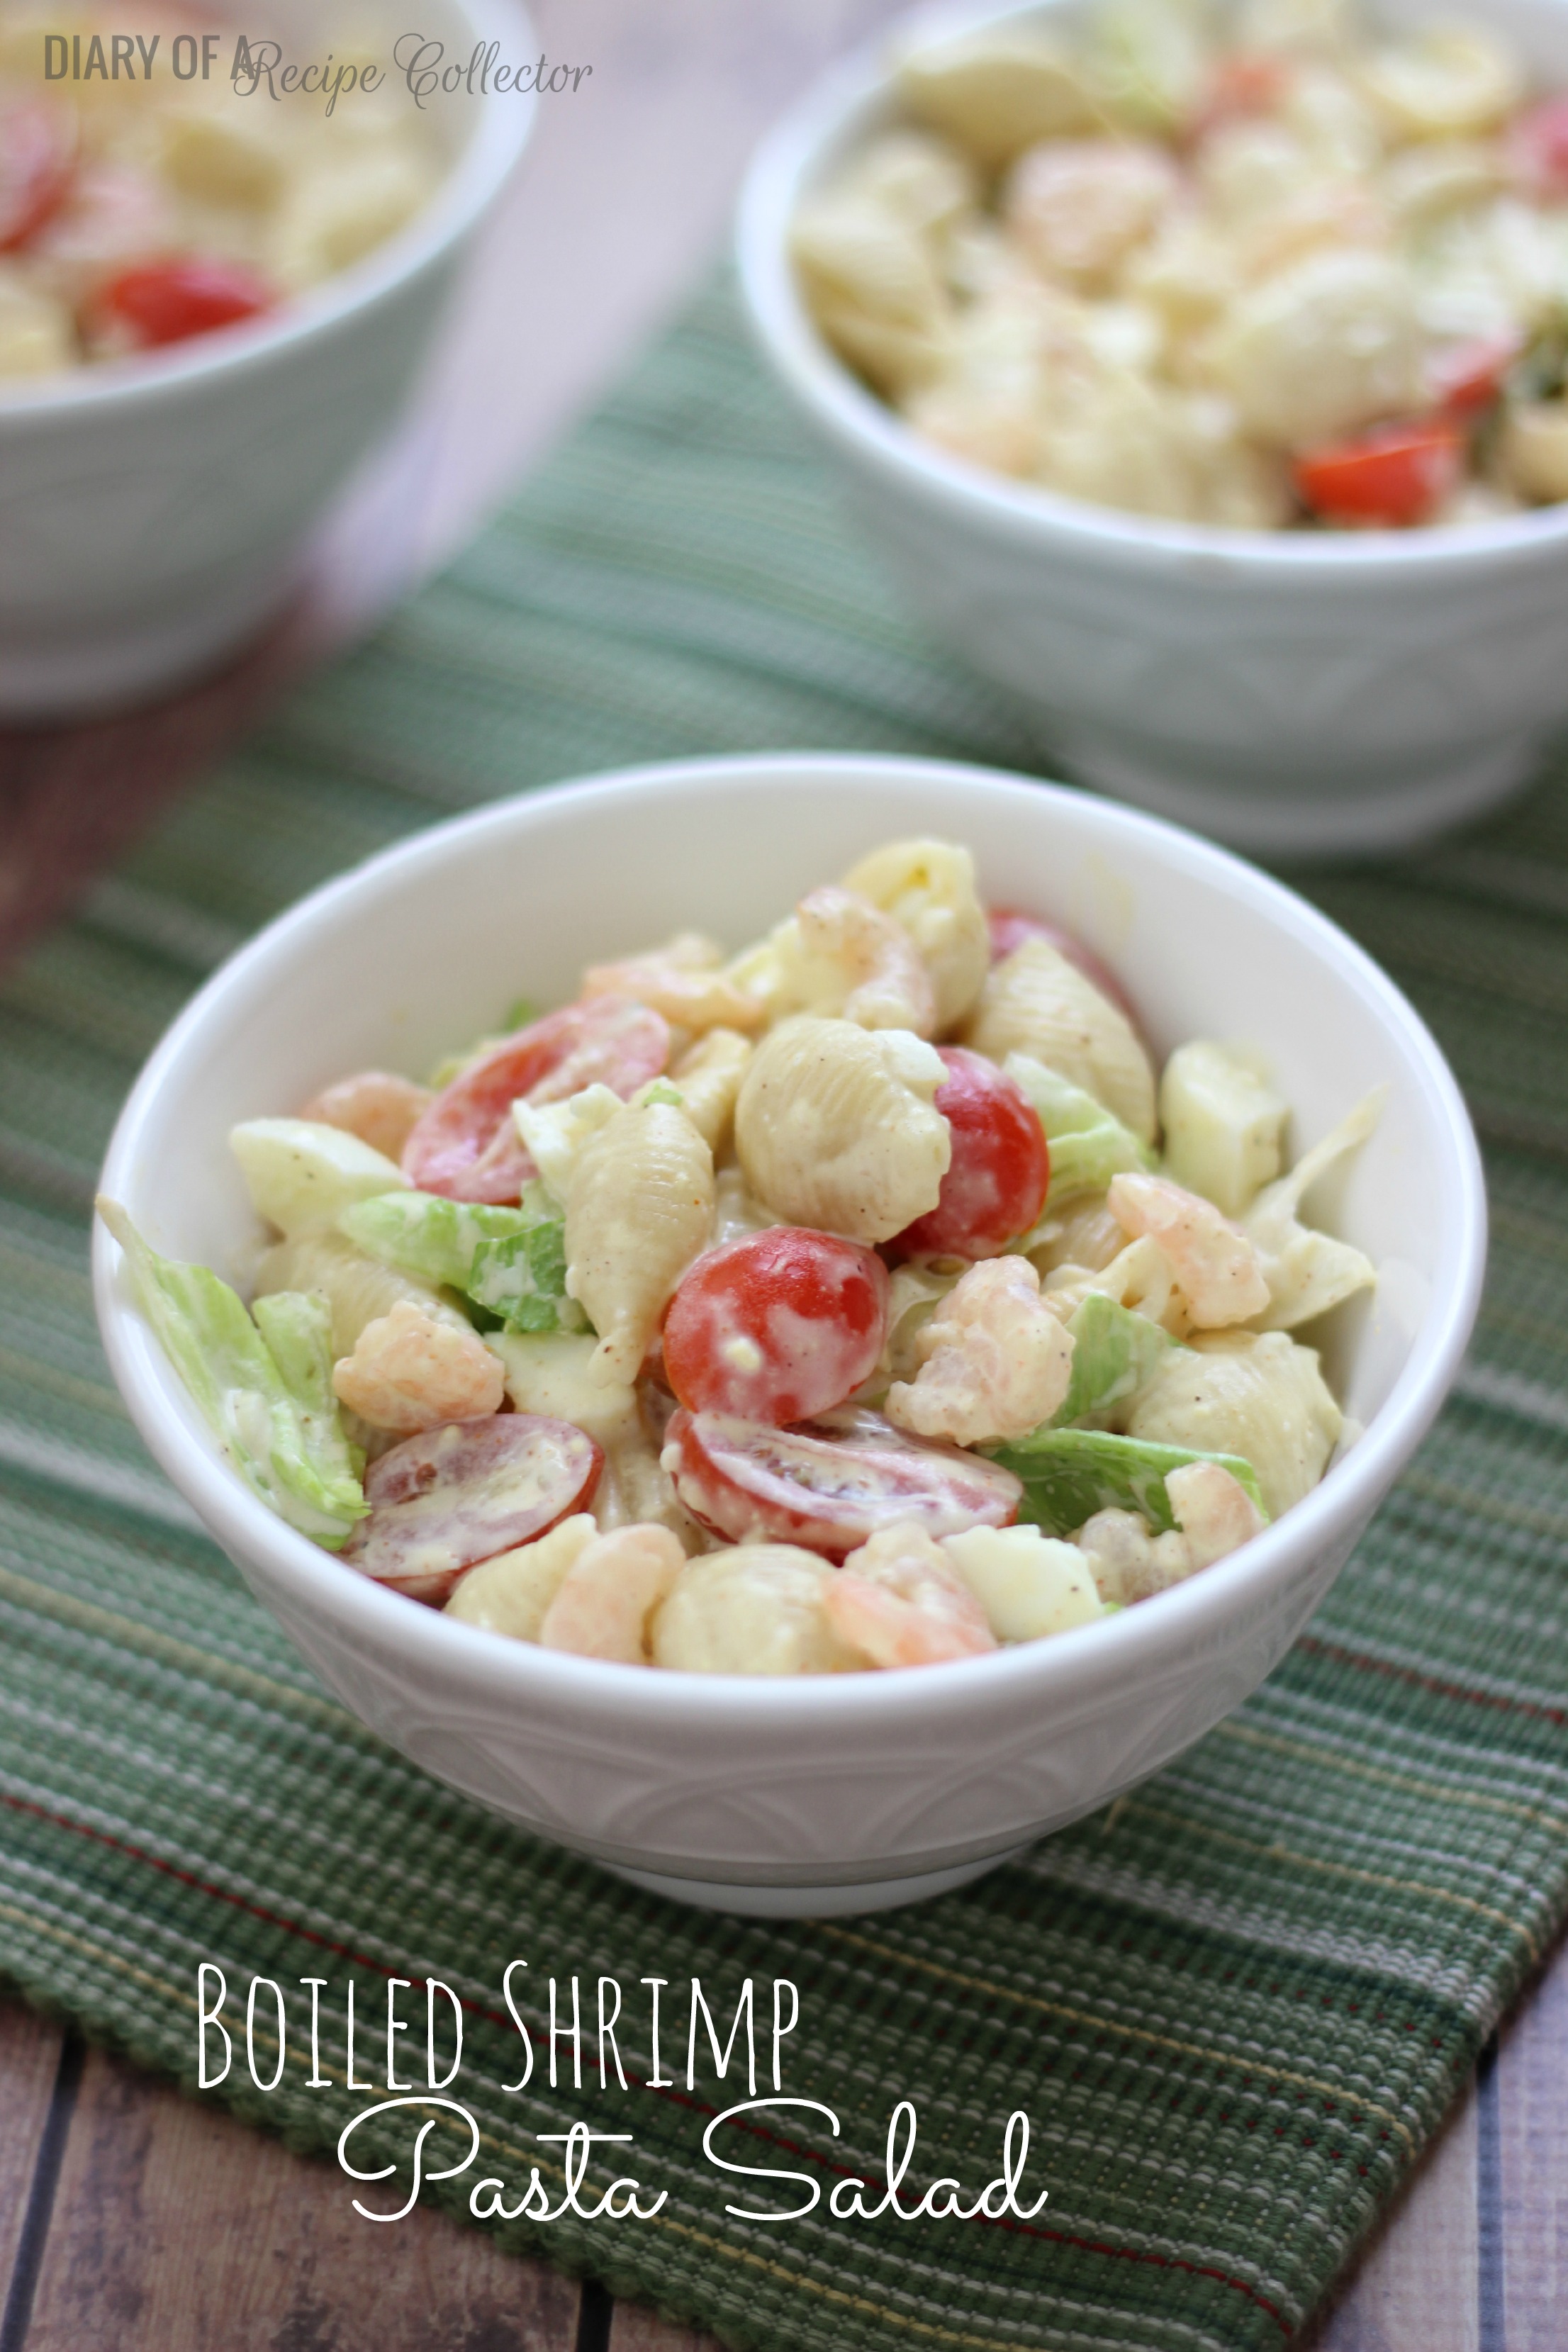 Boiled Shrimp Pasta Salad - Diary of A Recipe Collector